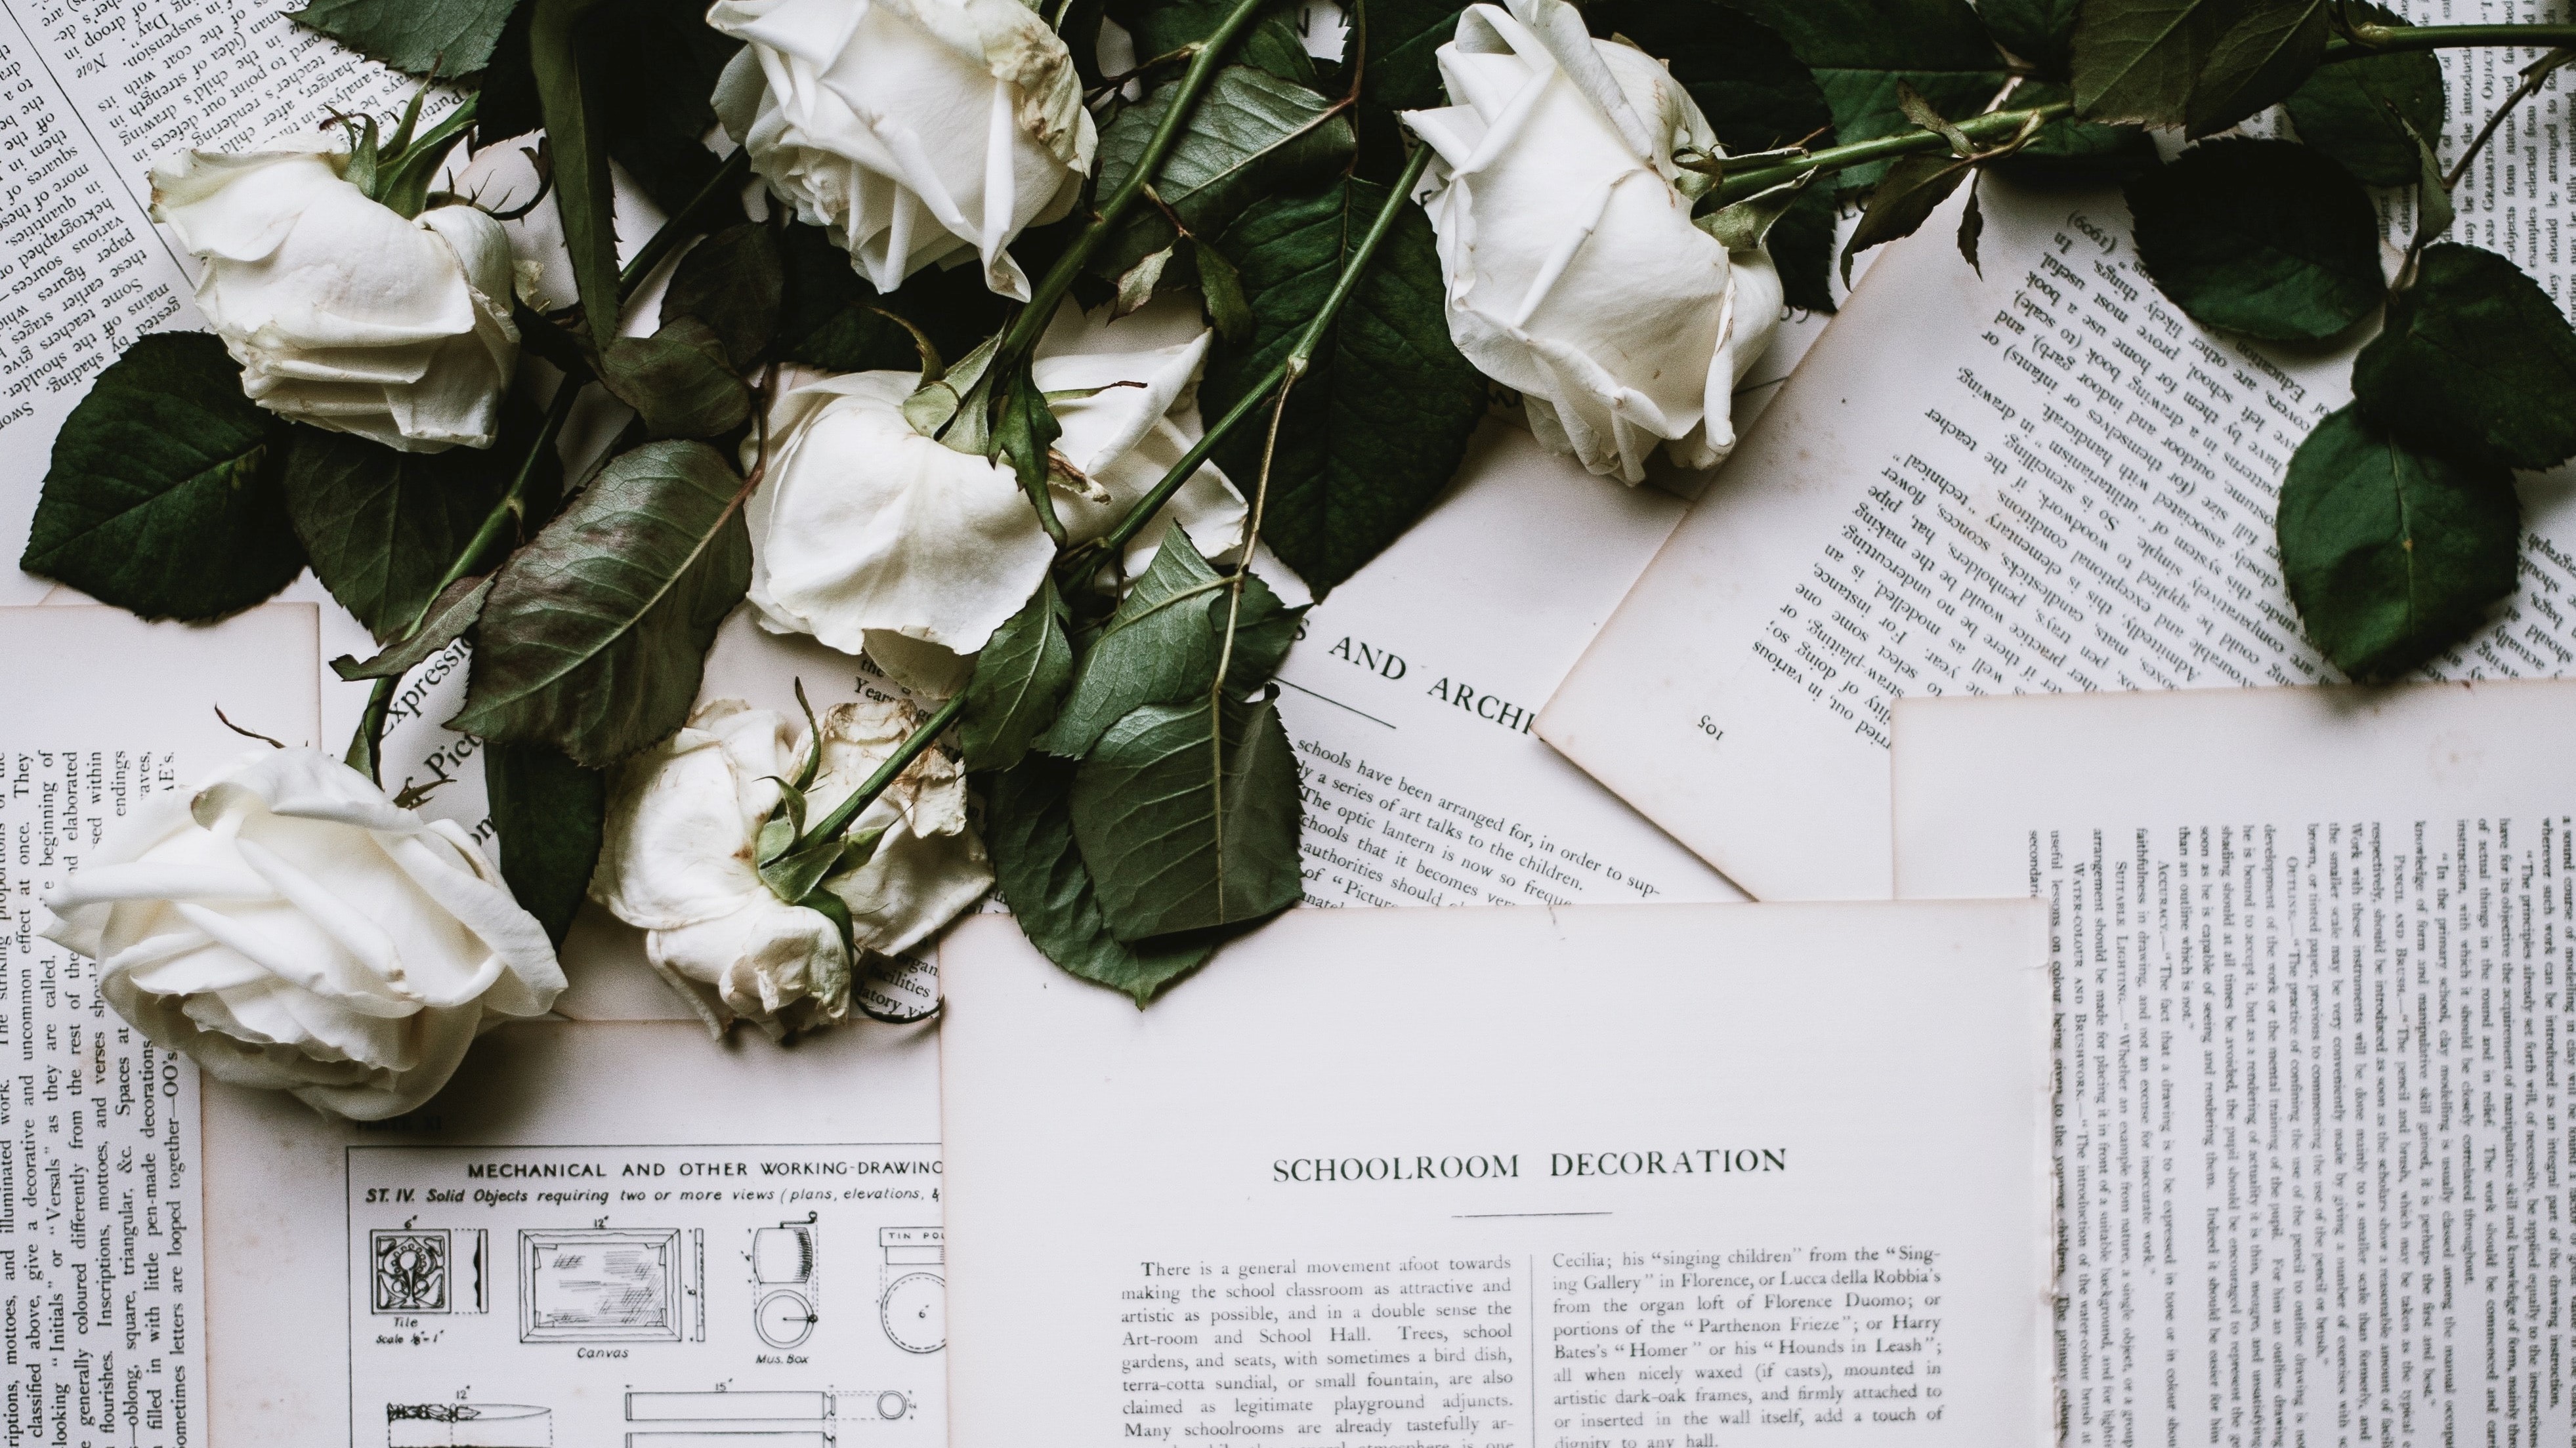 White roses over pages of text